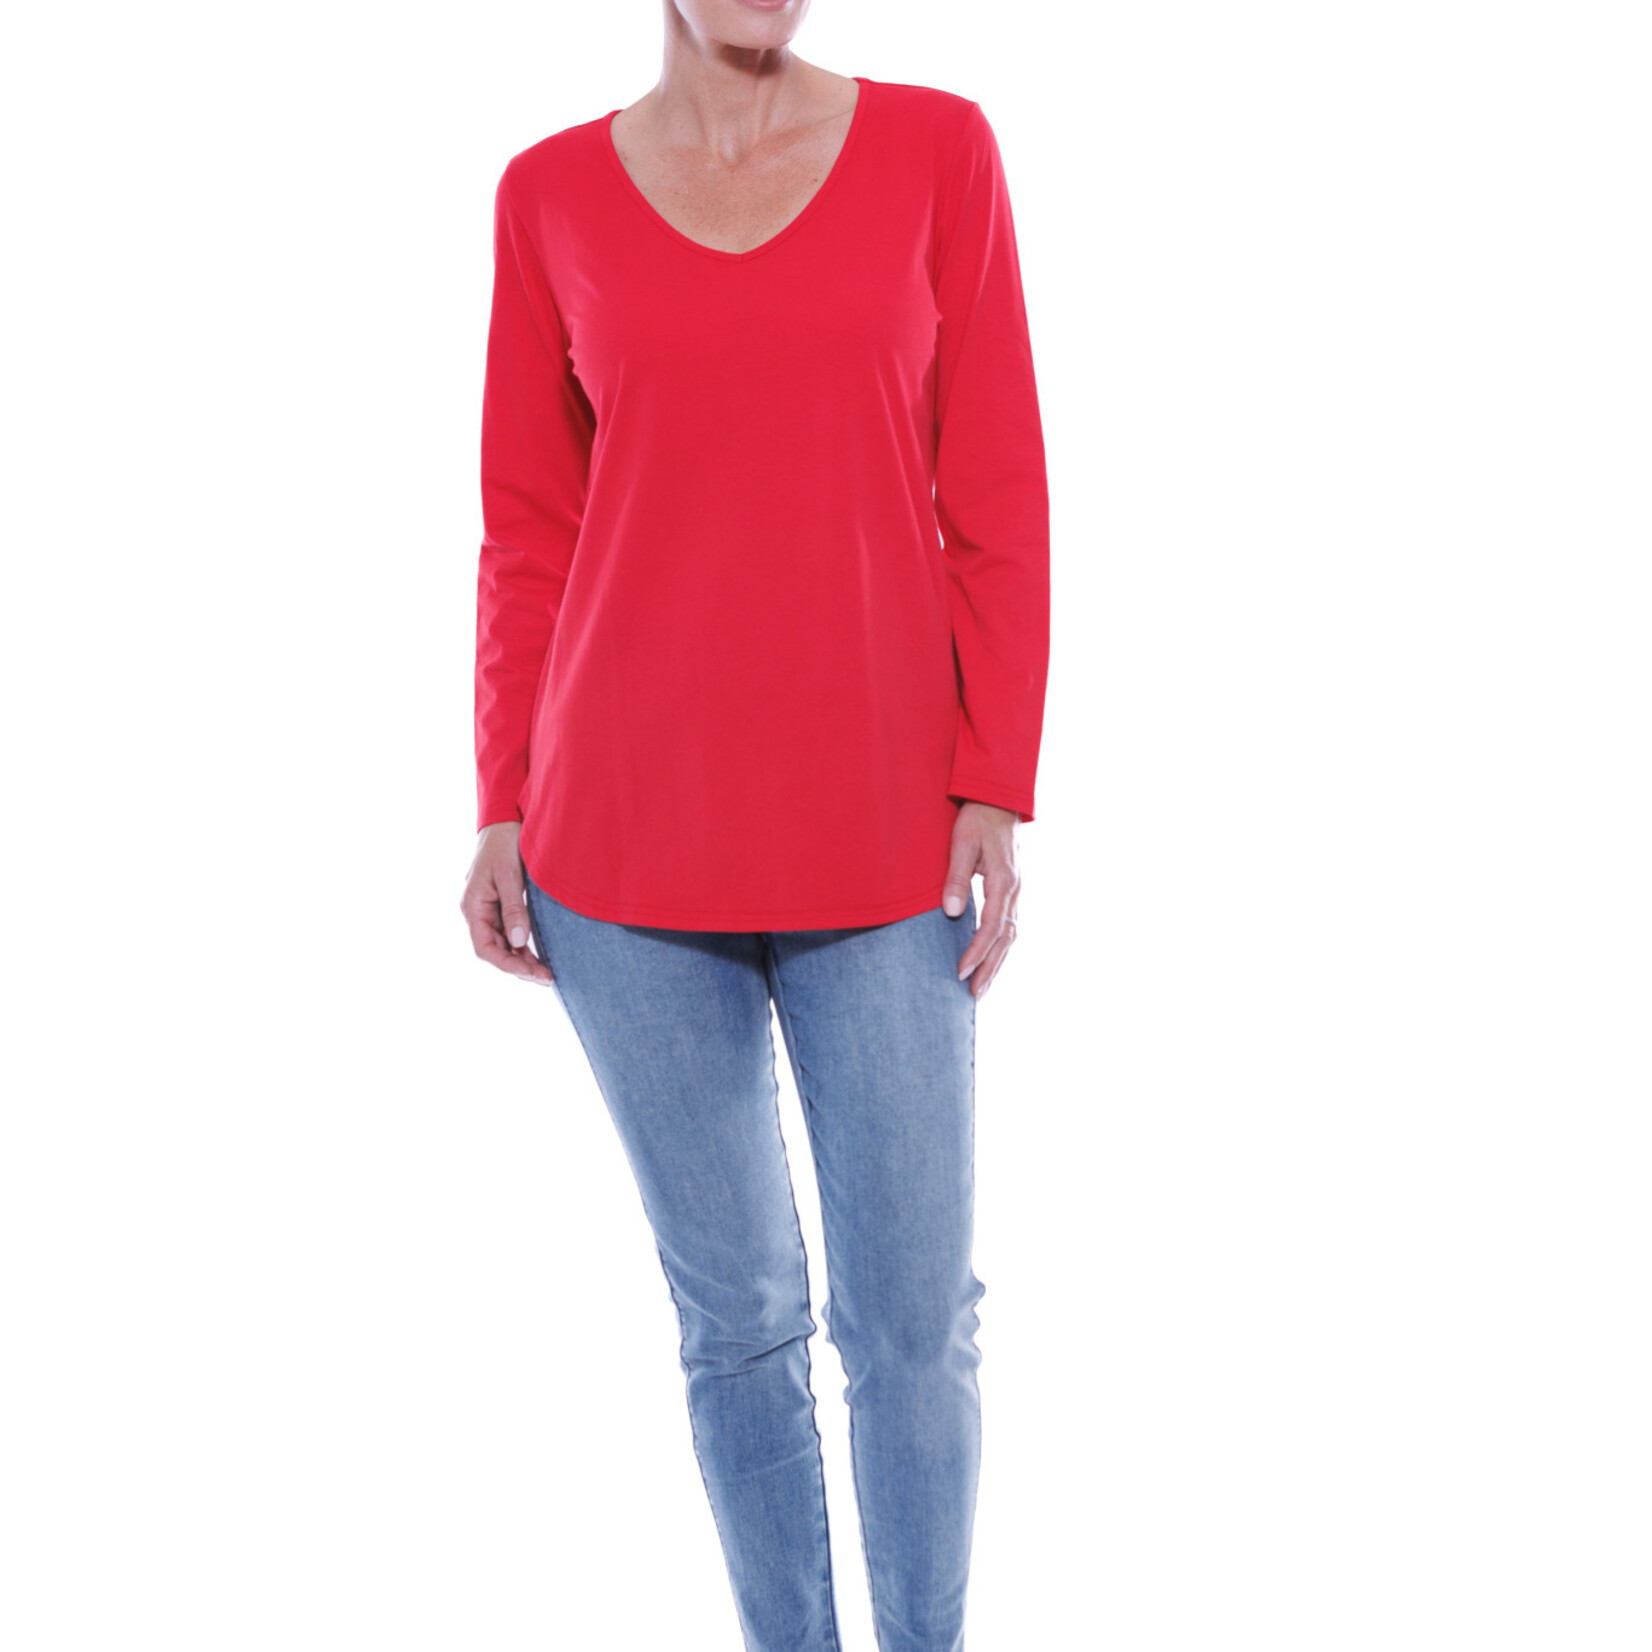 Cafe Latte Red Cotton Long Sleeve V-Neck Tee